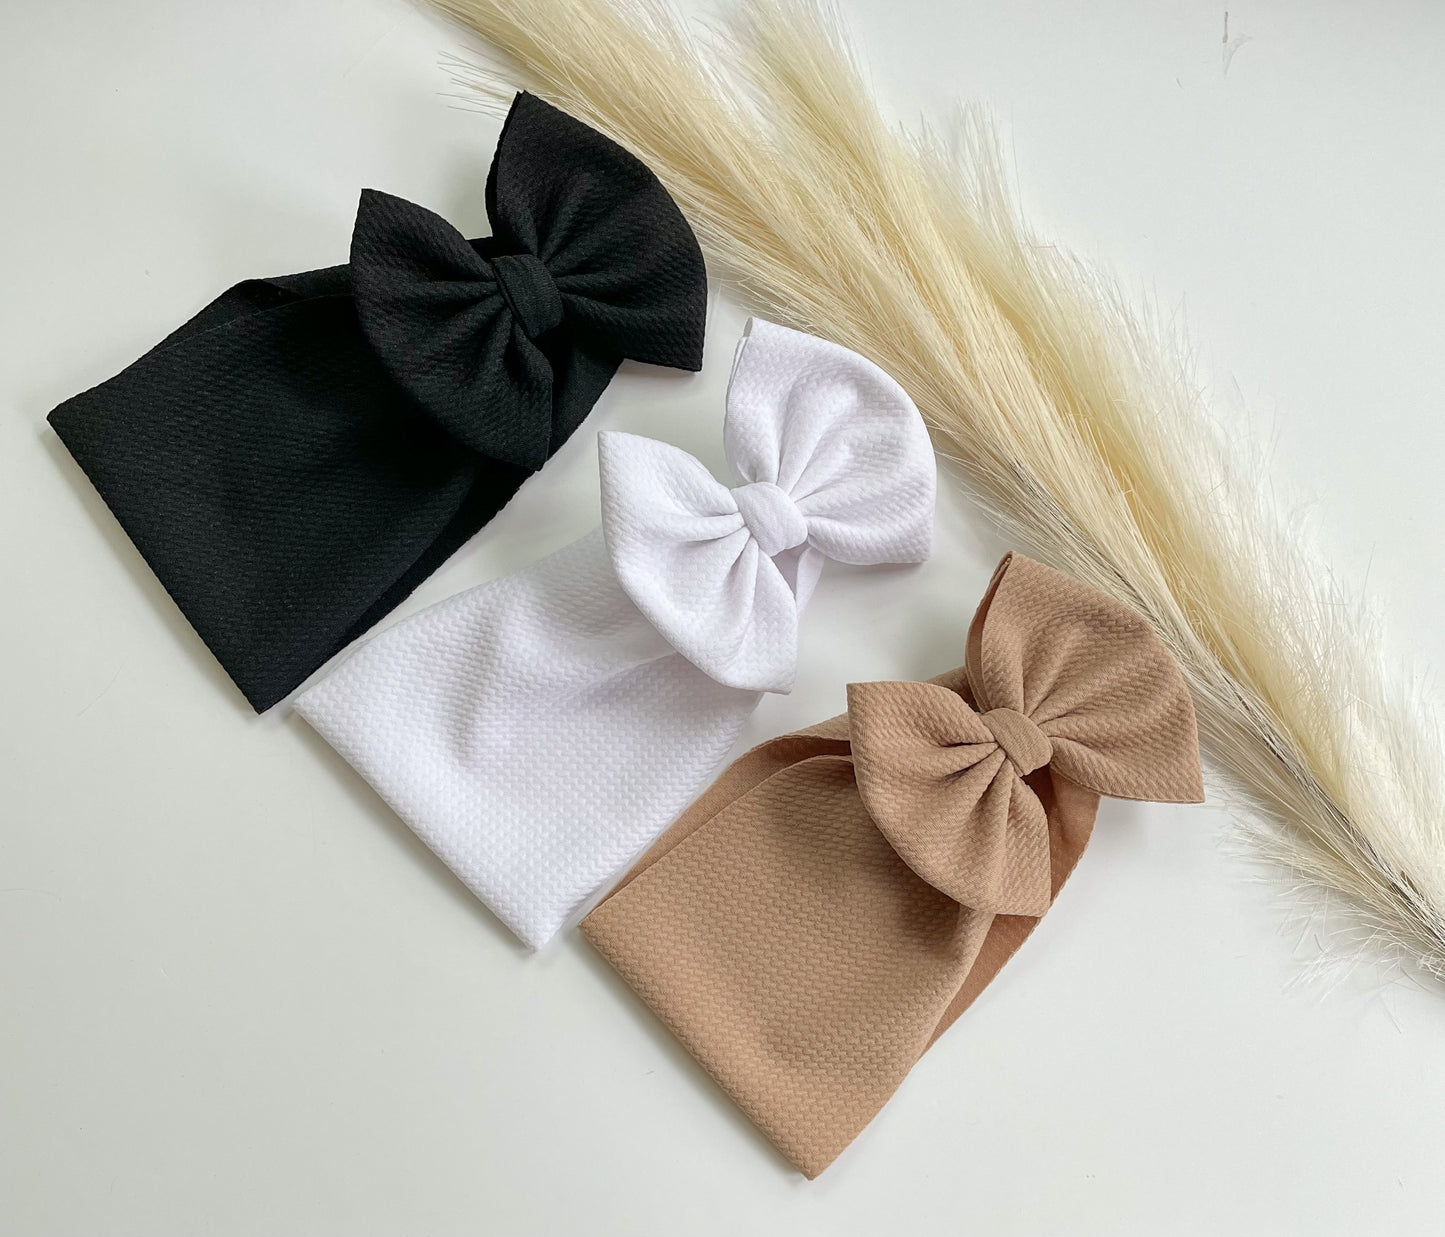 Neutral Originals - Ev's Bowtique Shop, The most comfortable trendy bows for all of your babes. Traditional bows come styled as headwraps, Nylons, clips or pigtail sets! The choice is always yours!